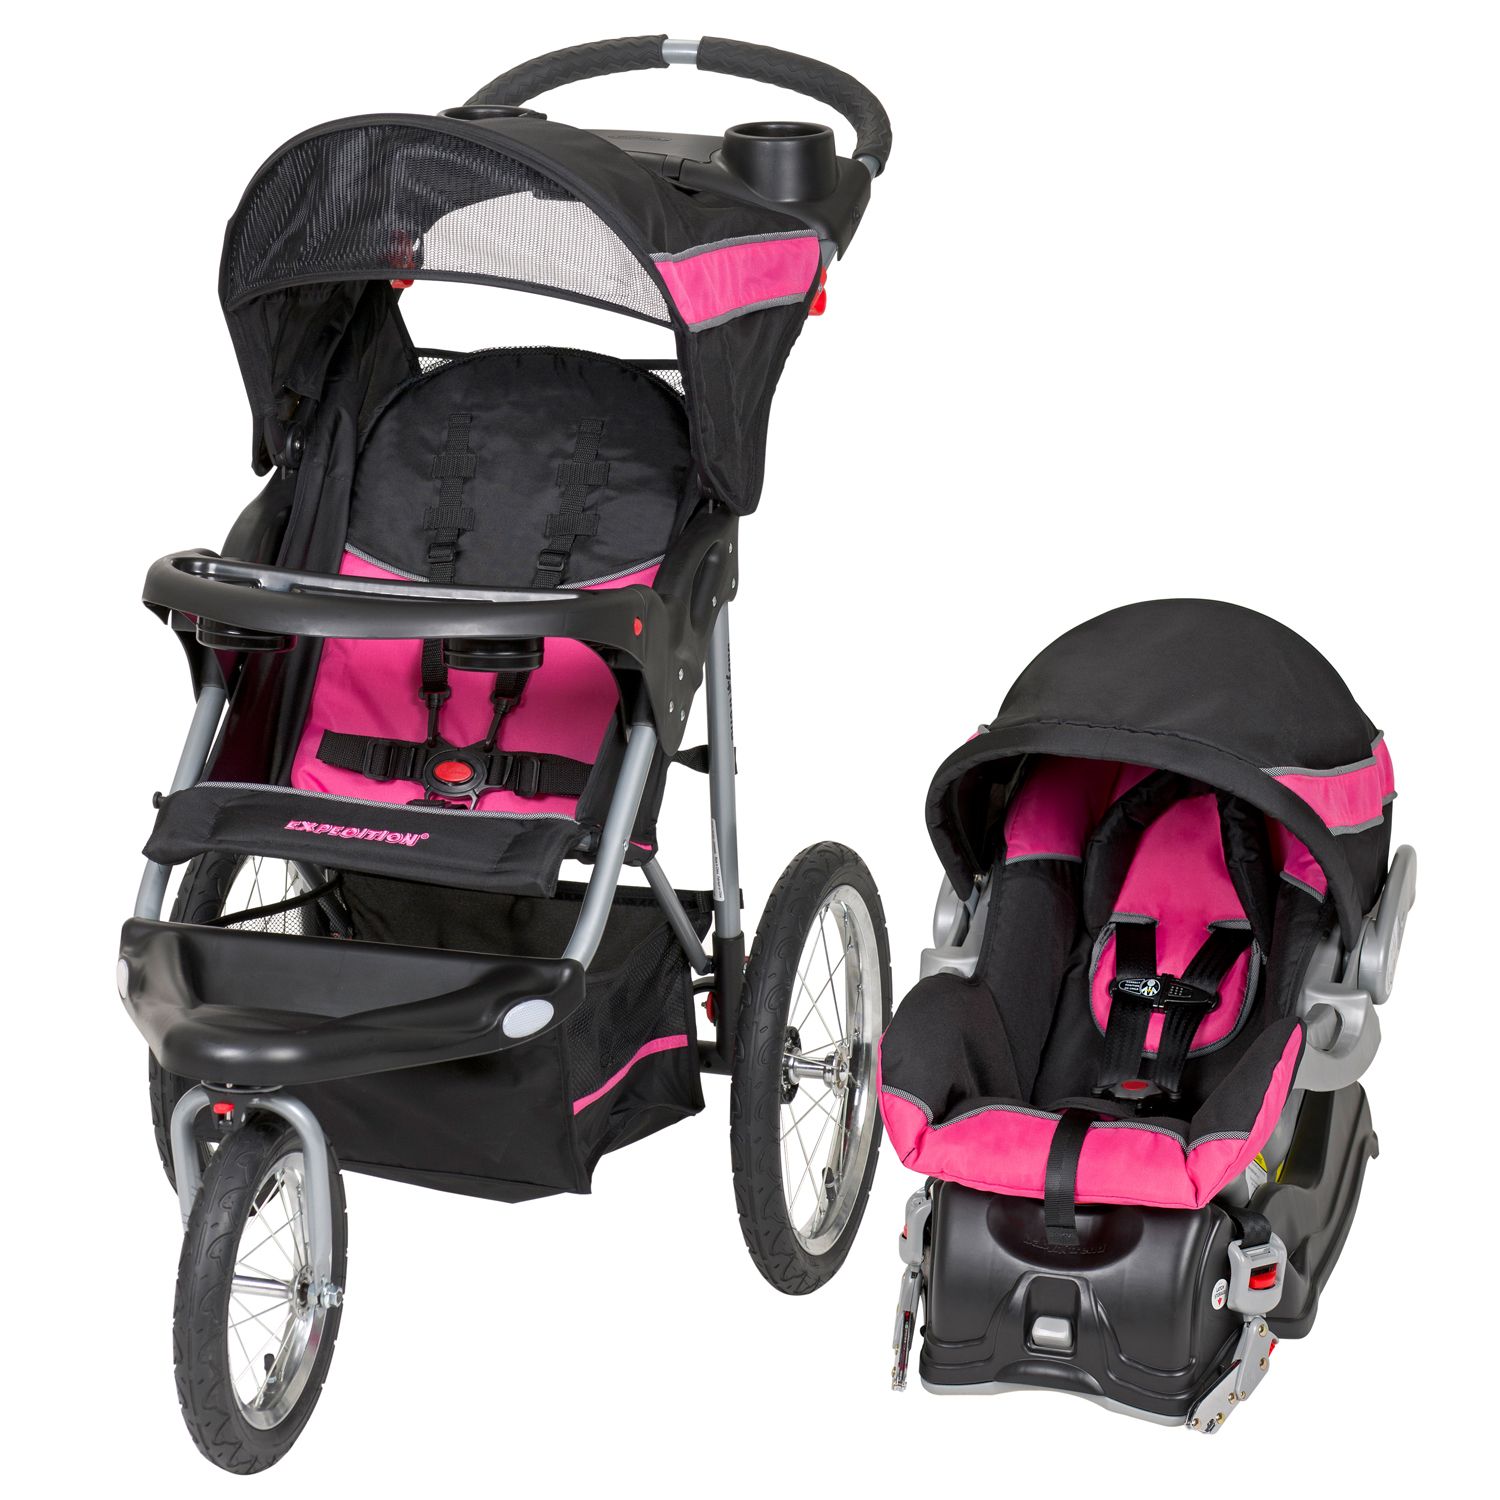 baby trend pathway 35 jogger travel system reviews